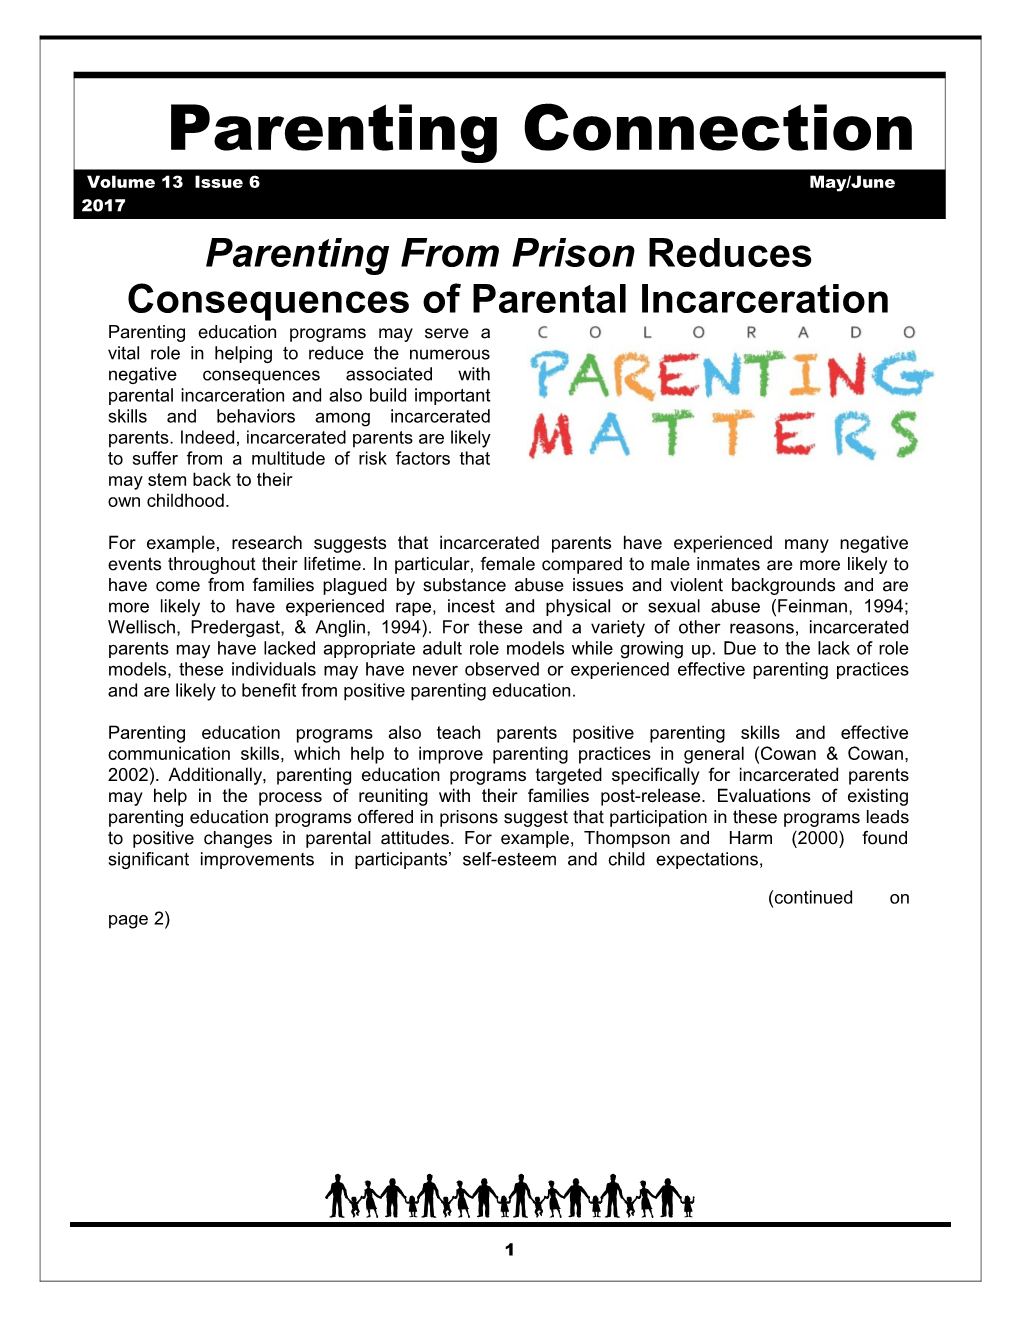 Parenting from Prison Reduces Consequences of Parental Incarceration